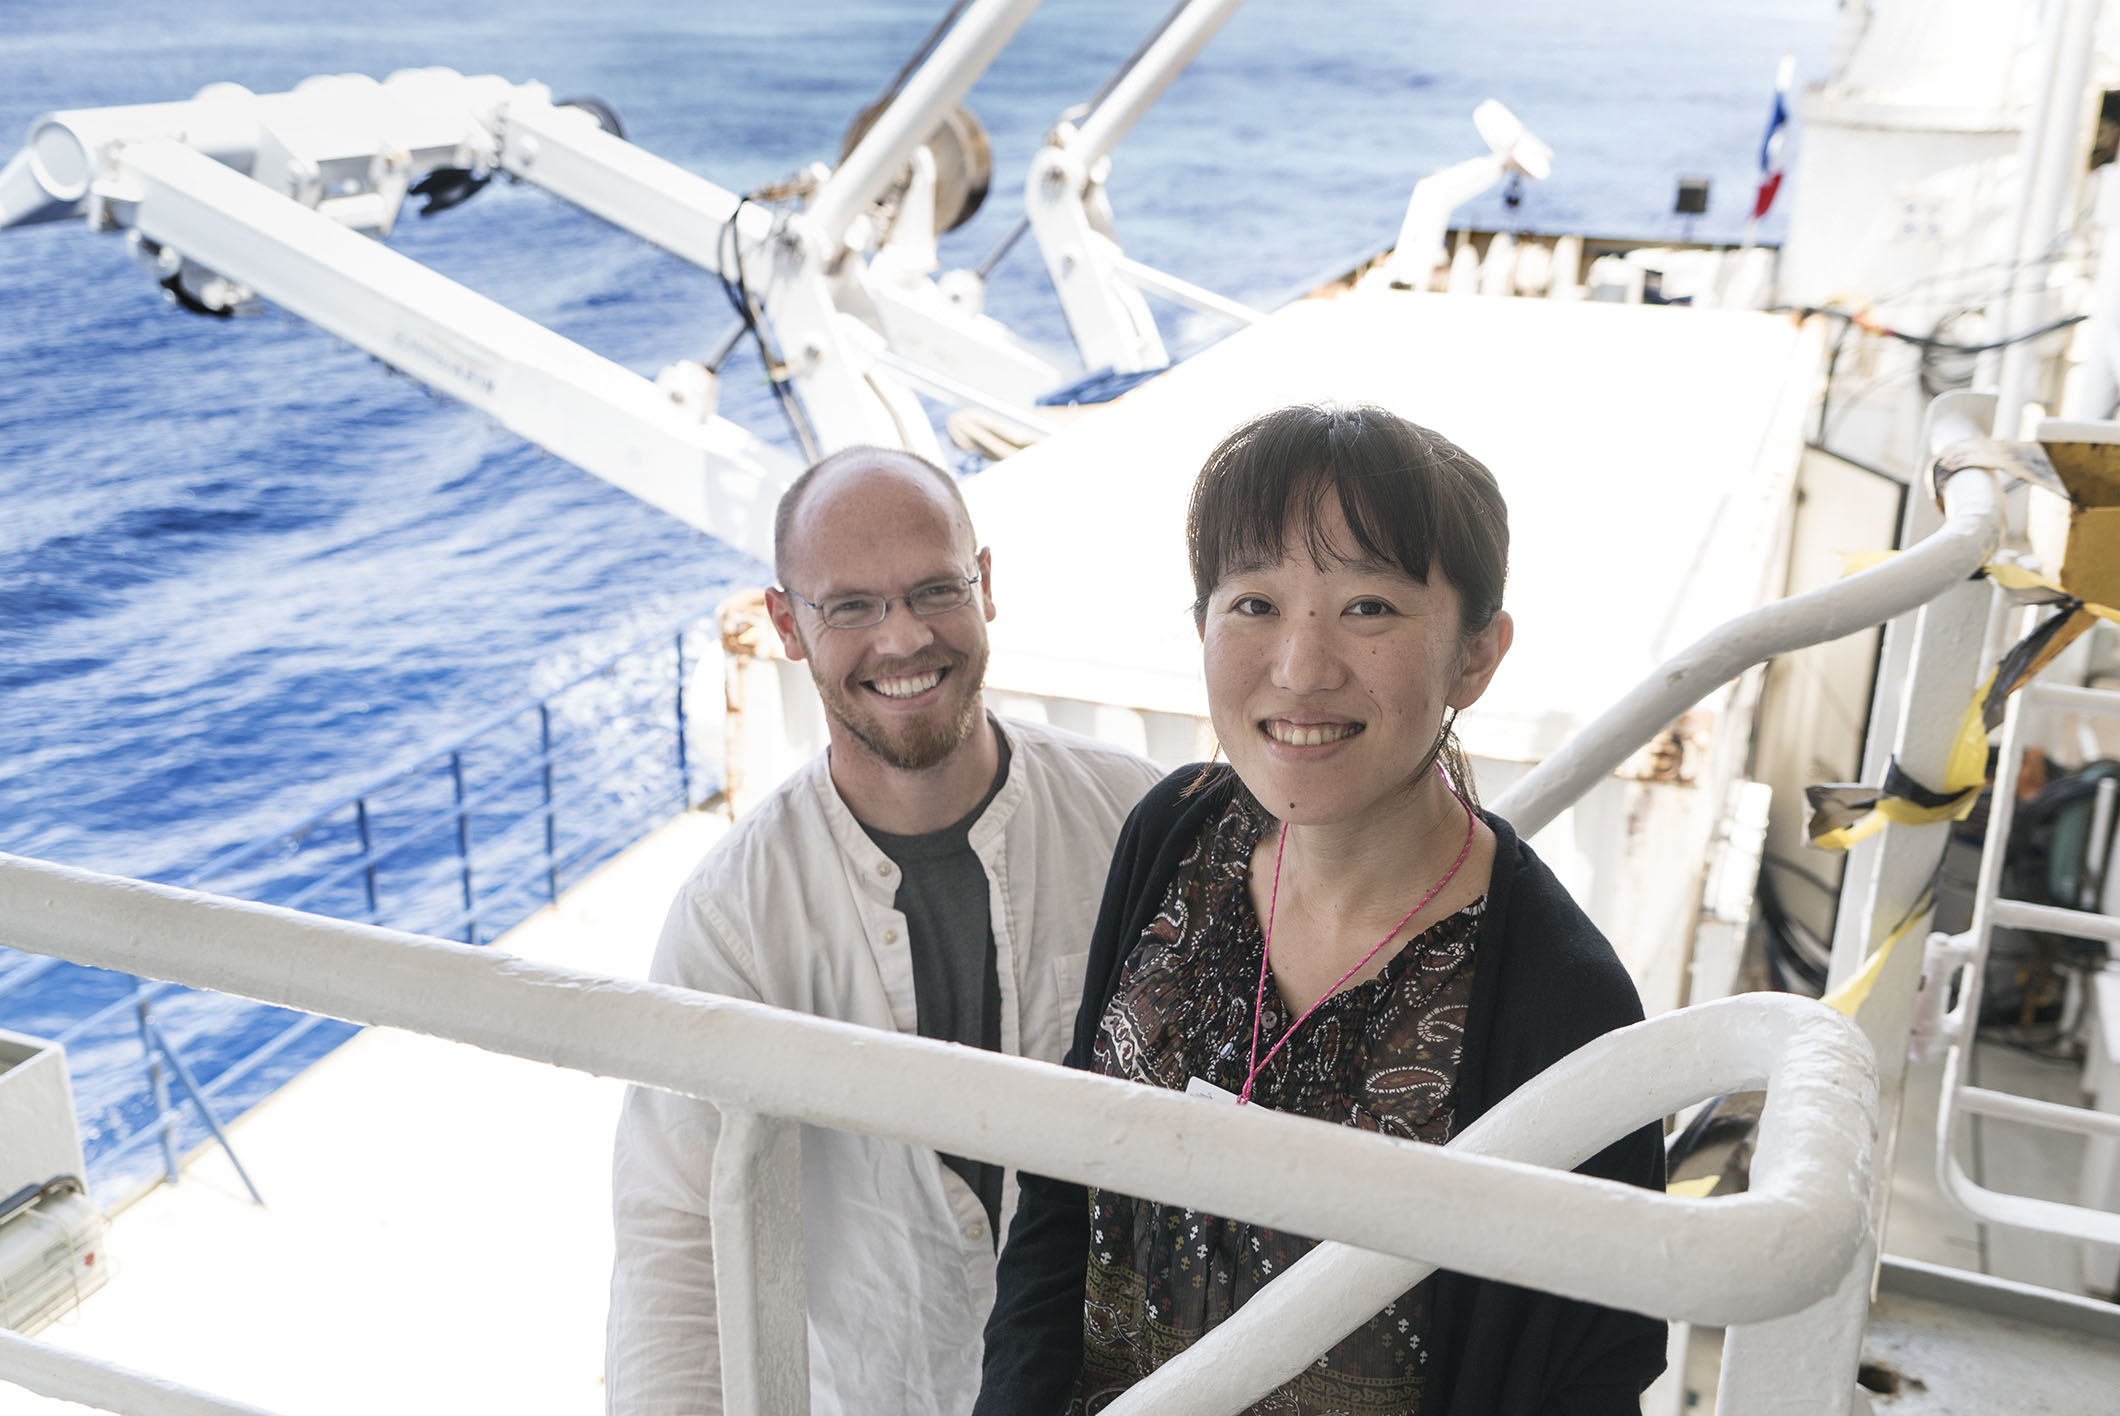 Drs Bradley and Hamahashi are part of the world-class scientific team sailing towards the Wharton Basin. They are both Geologists and Research Fellows at the Earth Observatory of Singapore (Source: EOS/Monika Naranjo Gonzales) 